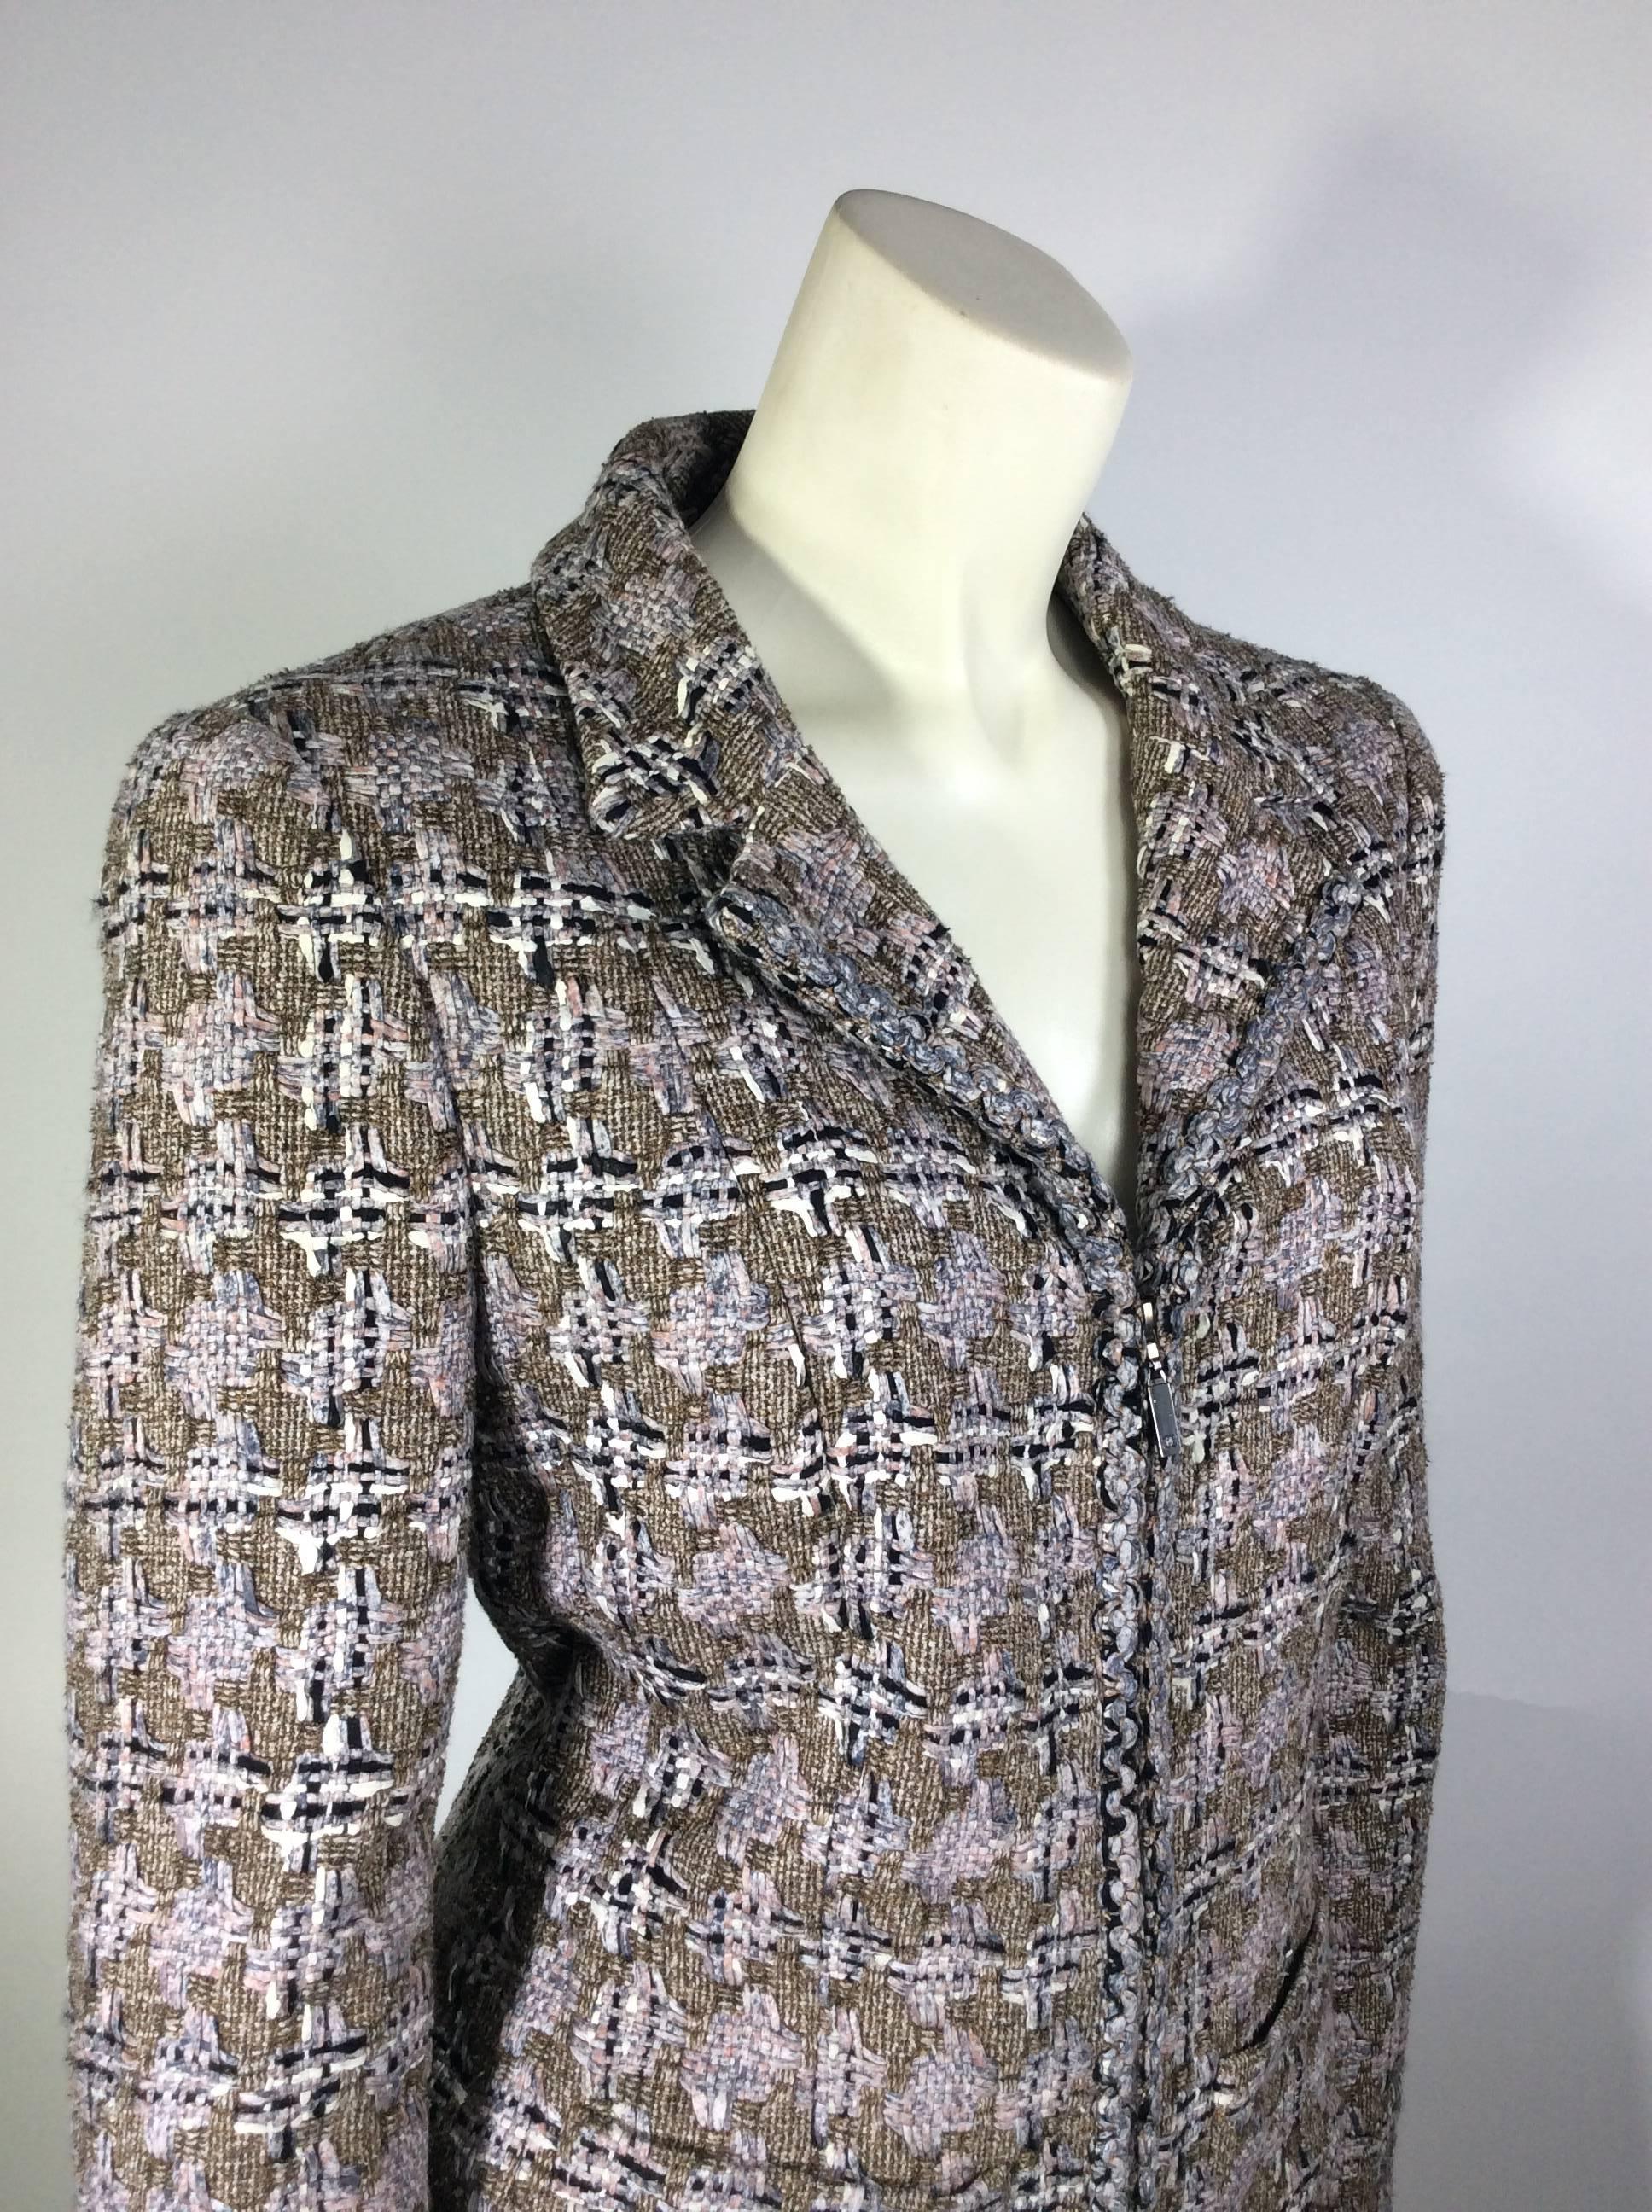 HOLIDAY FLASH SALE! 50% Off! Chanel Spring 2003 Lavender and Brown Tweed Suit For Sale 1